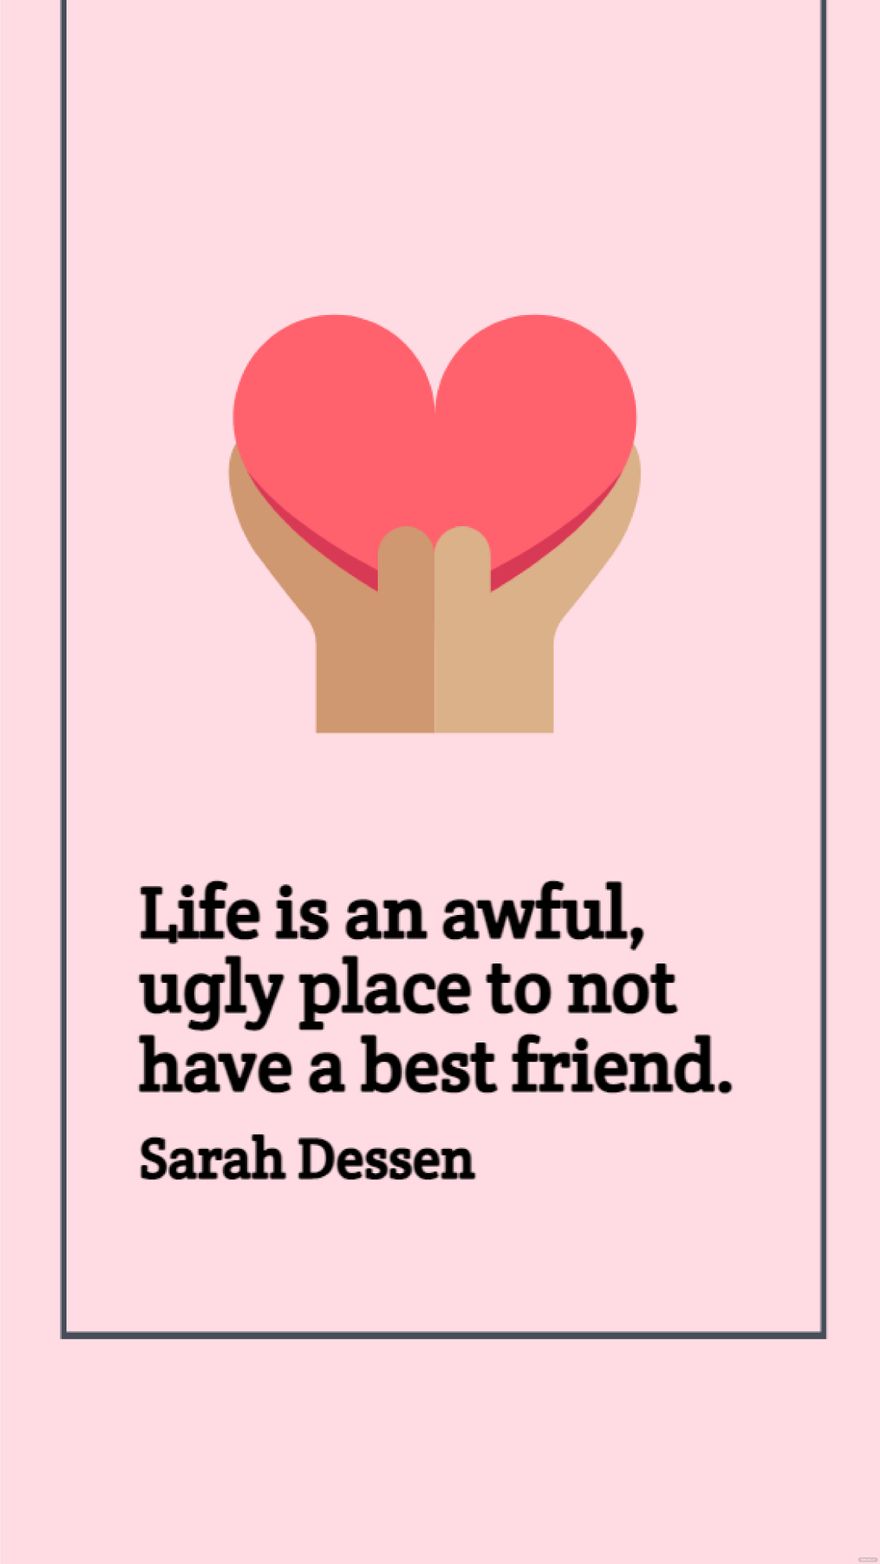 Free Sarah Dessen - Life is an awful, ugly place to not have a best friend. in JPG